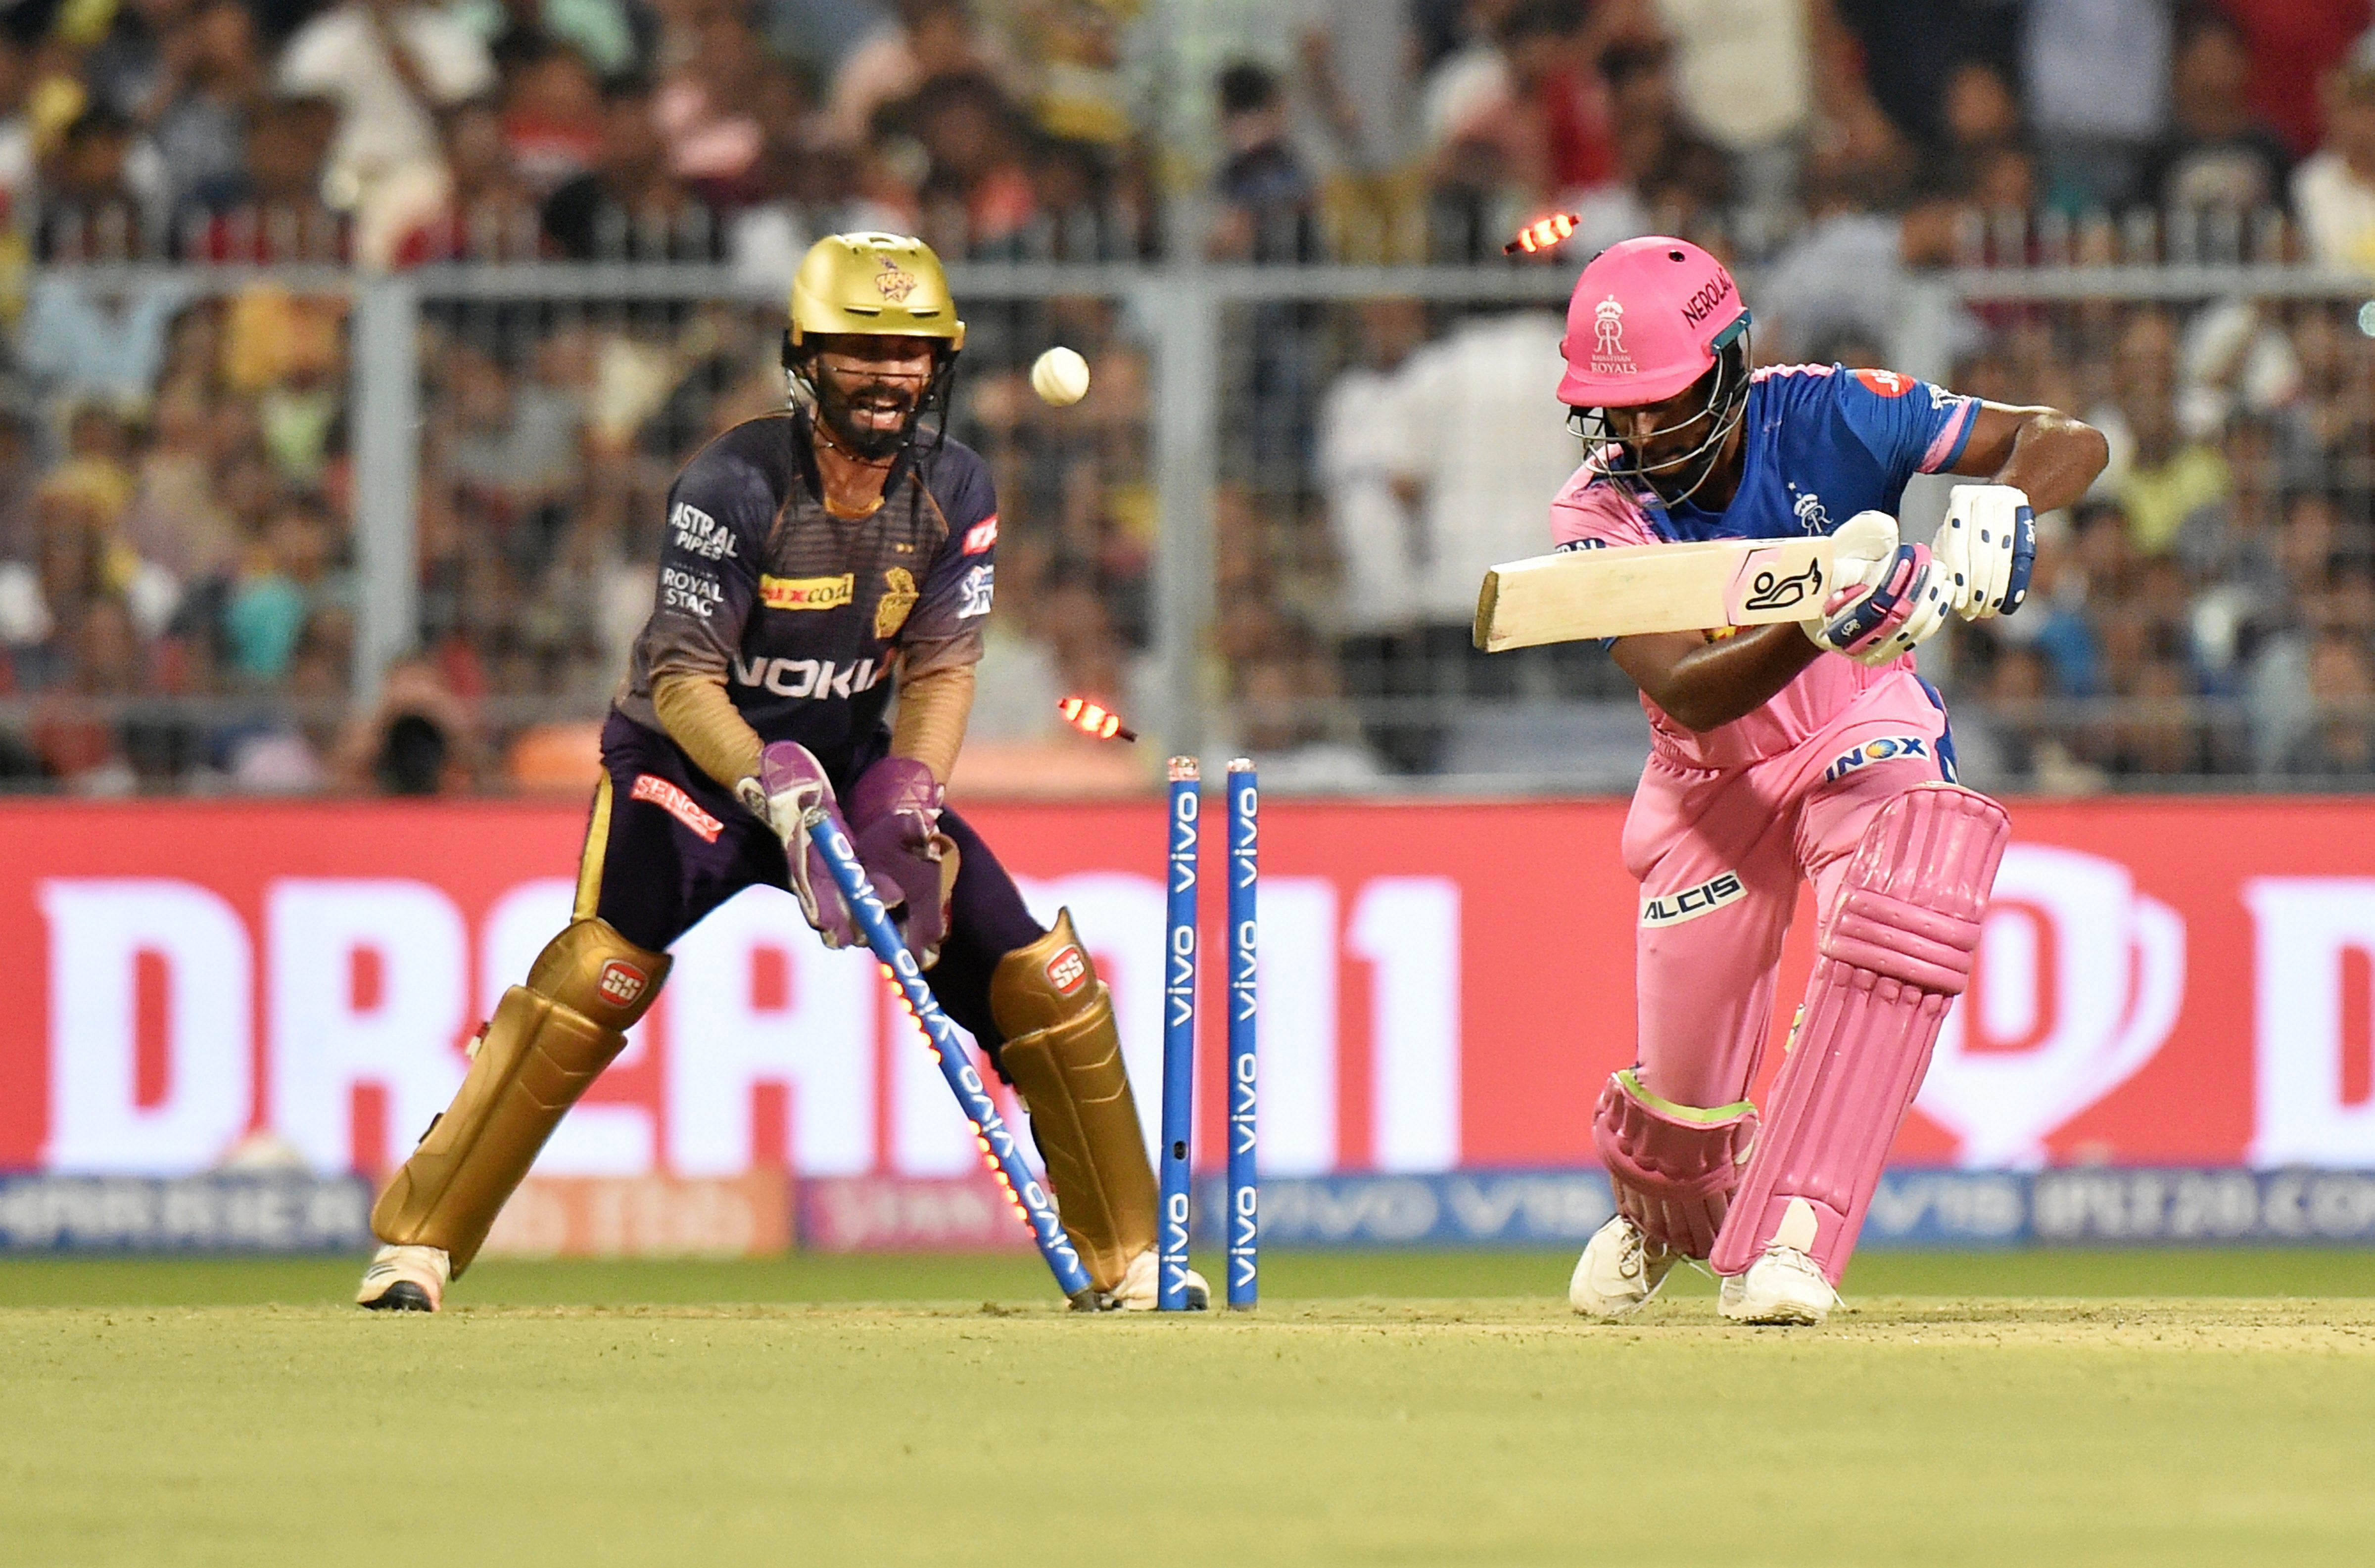 My job to lead from front, says Dinesh Karthik after another KKR loss